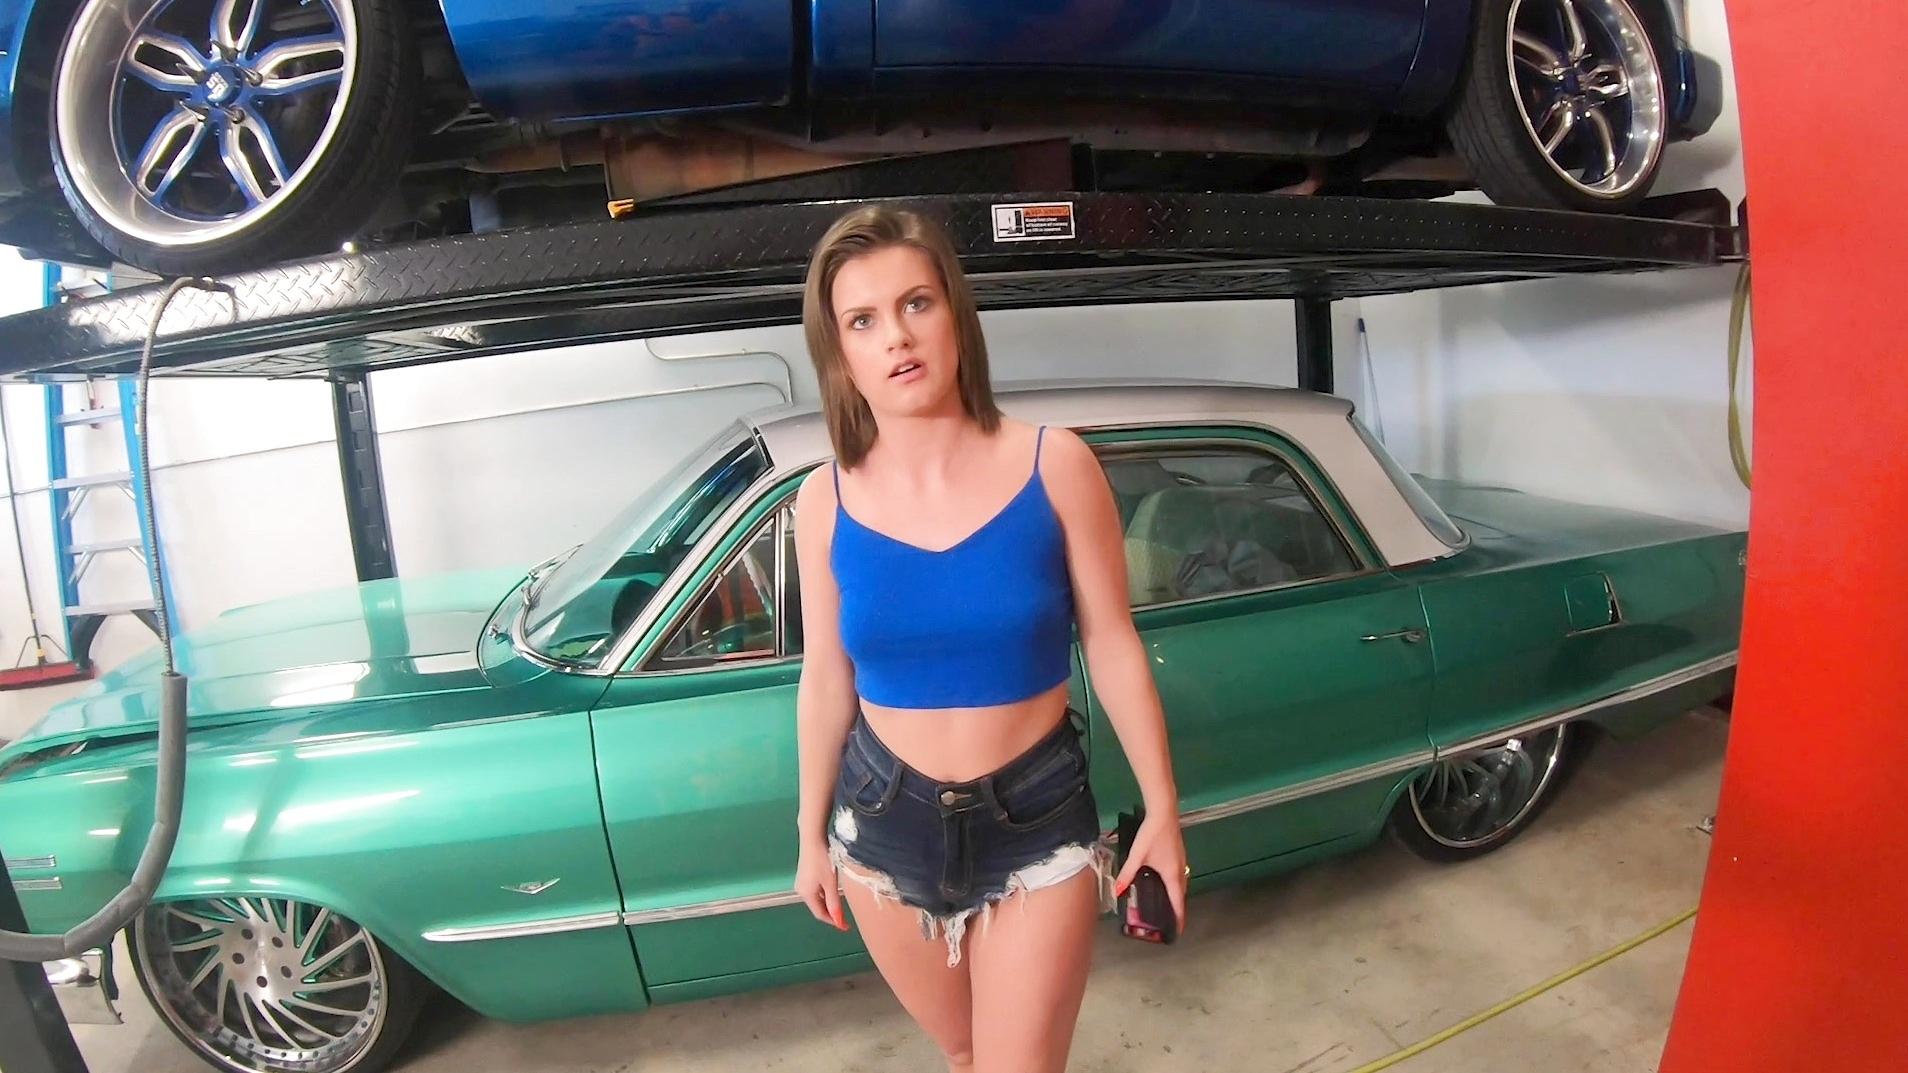 Rose Banks Covers The Bill With Sex To Get Her Mom’s Car Fixed